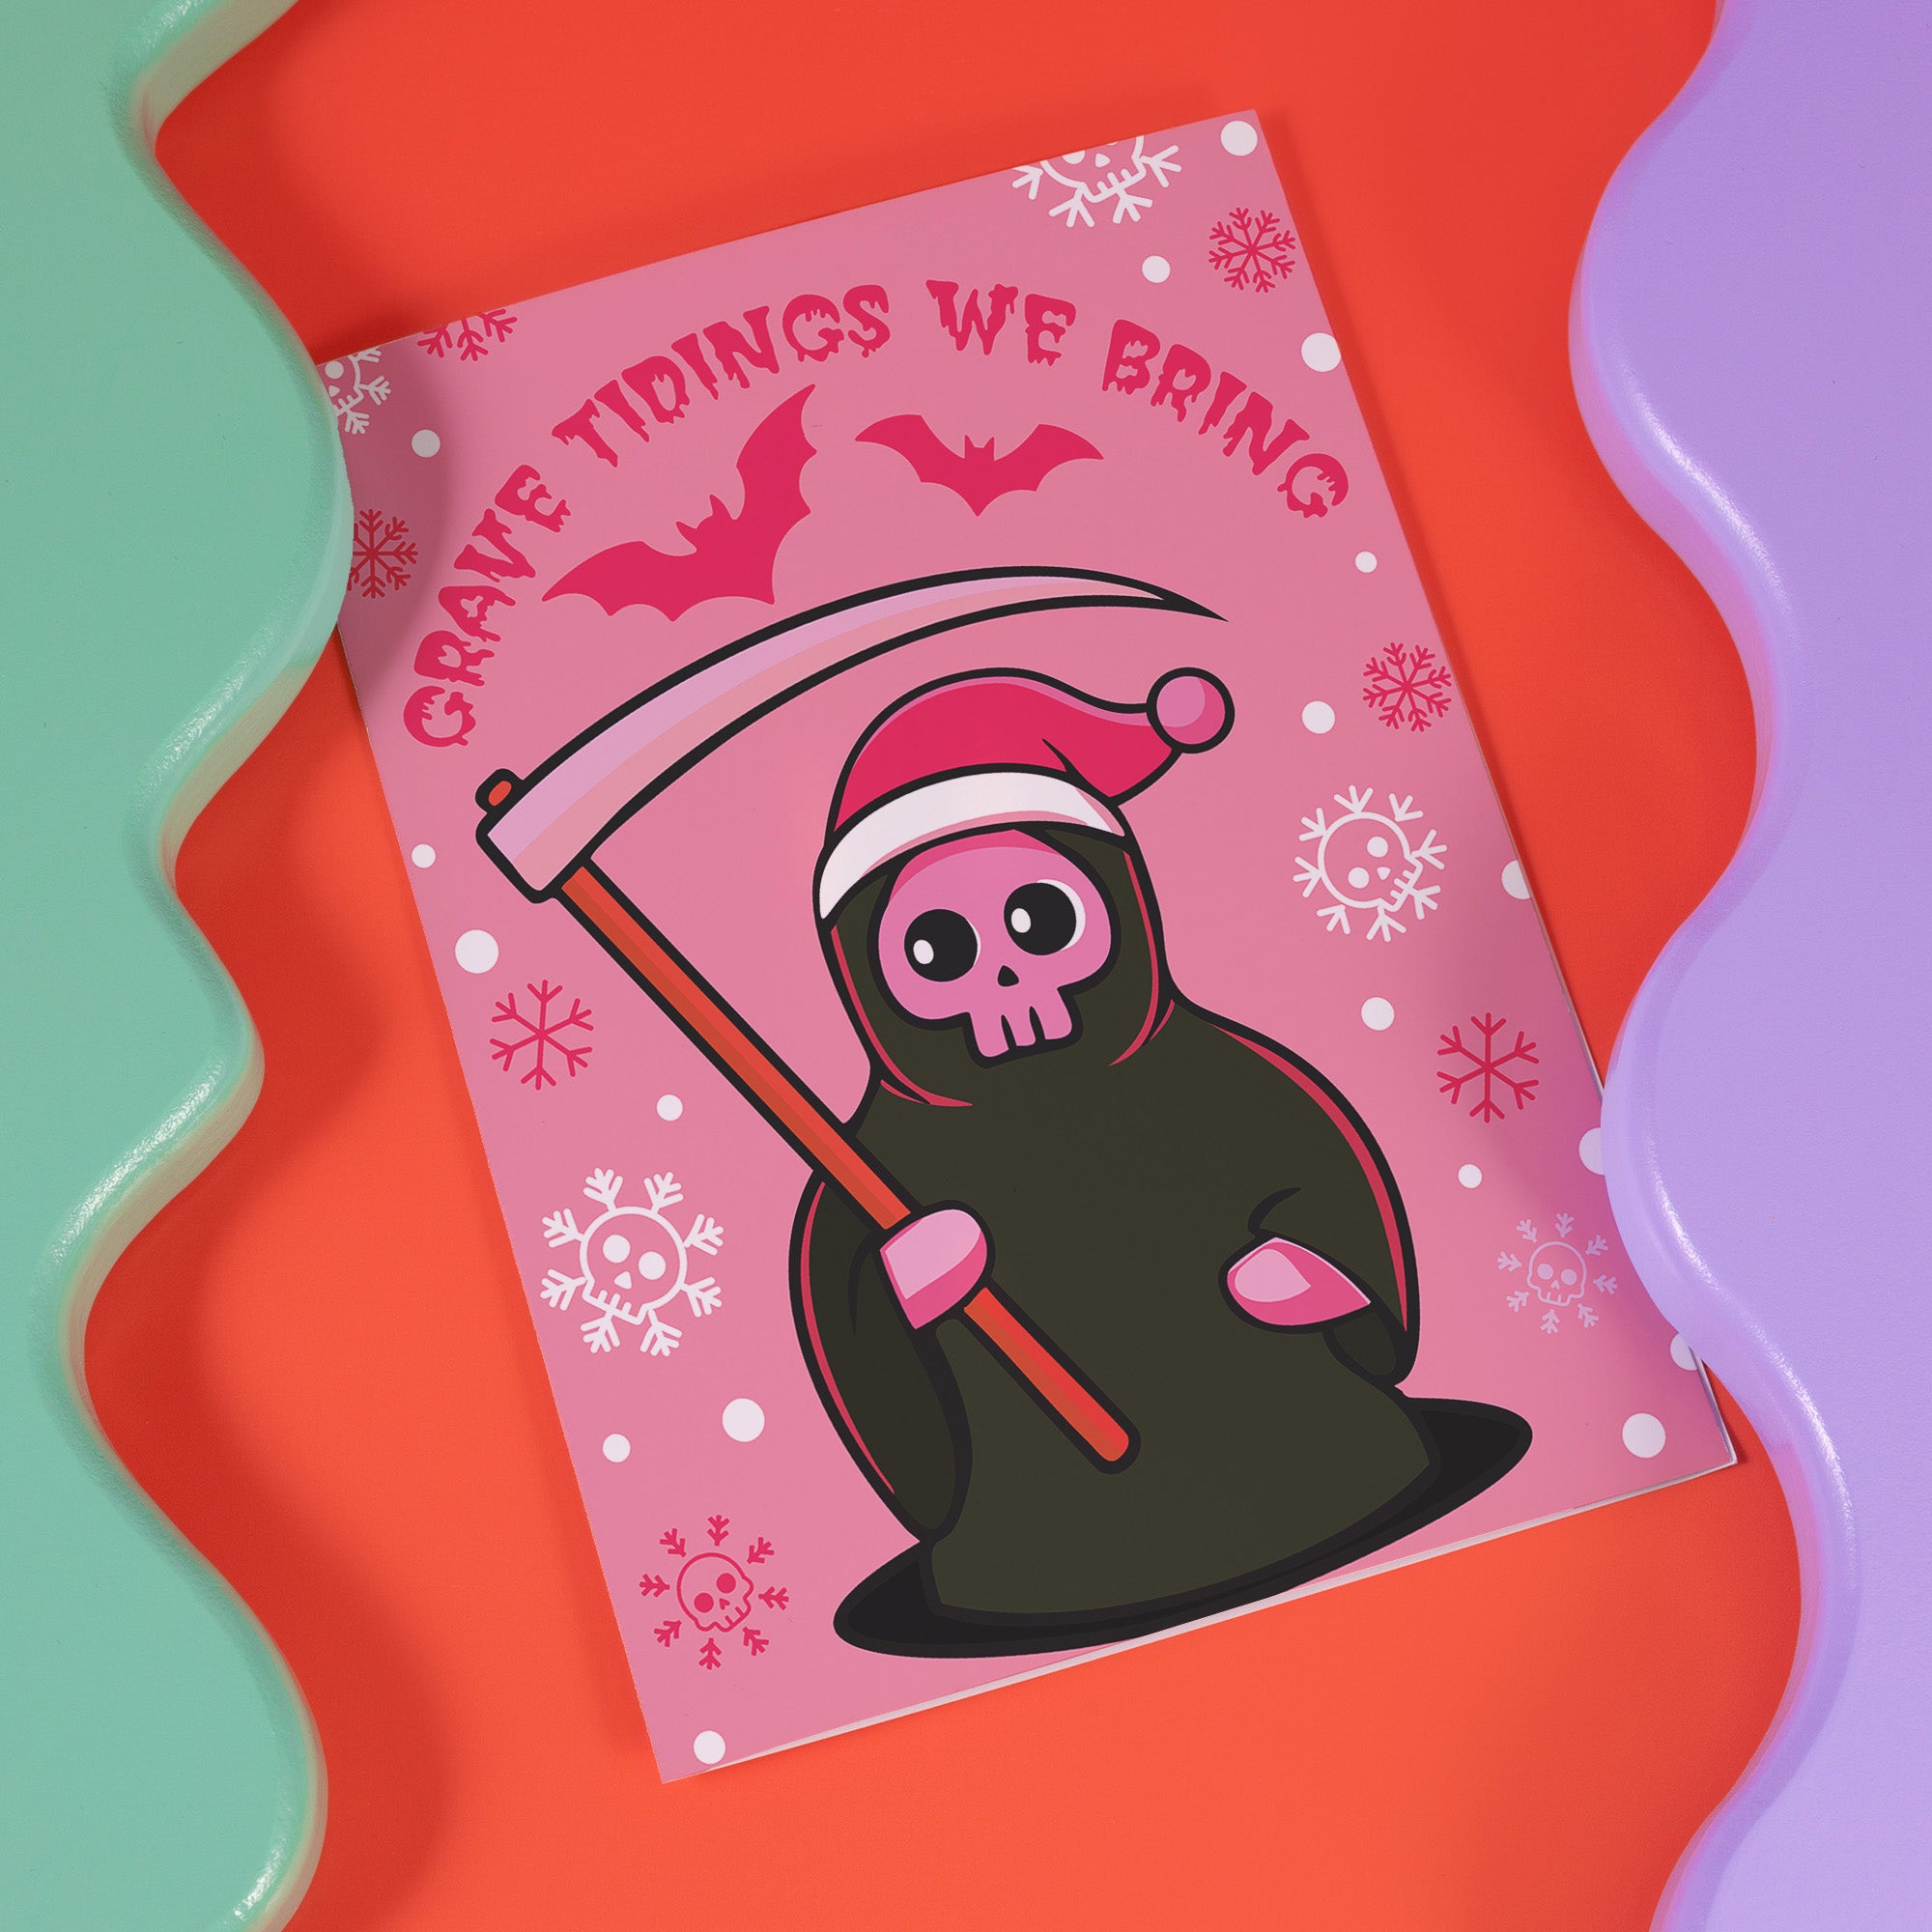 Quirky Christmas card featuring grim reaper in Santa hat. Pink background with bats, snowflakes, skull motifs. Text reads 'Grave Tidings We Bring'. Humorous blend of holiday cheer and gothic aesthetic. Perfect for alternative Christmas greetings.